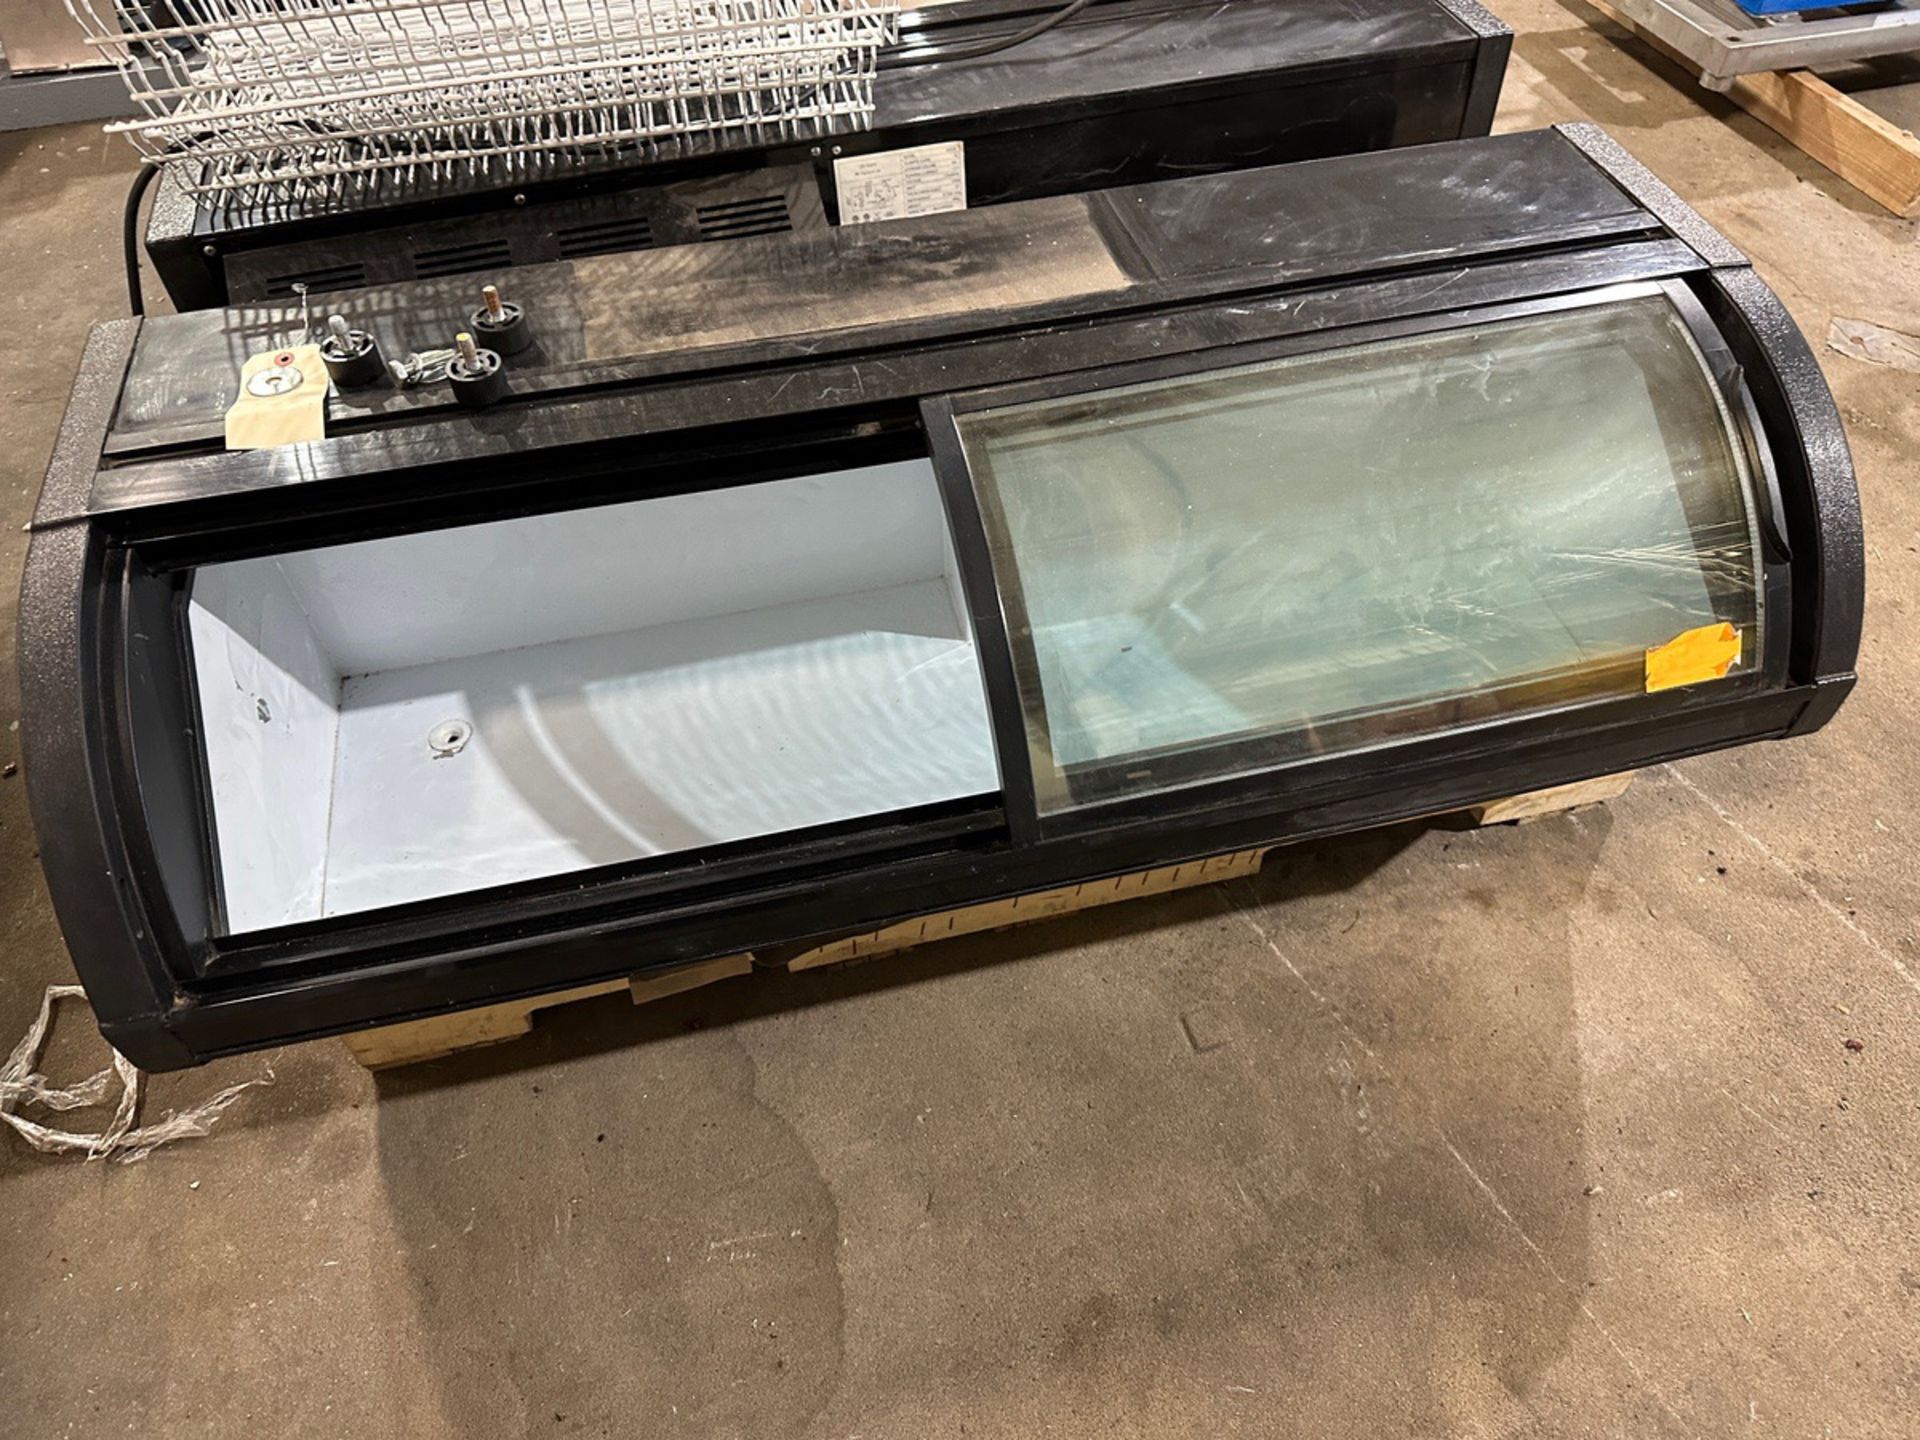 Lot of (2) IDS Ice Cream Display Freezers - Model SD147 | Rig Fee $100 - Image 3 of 5